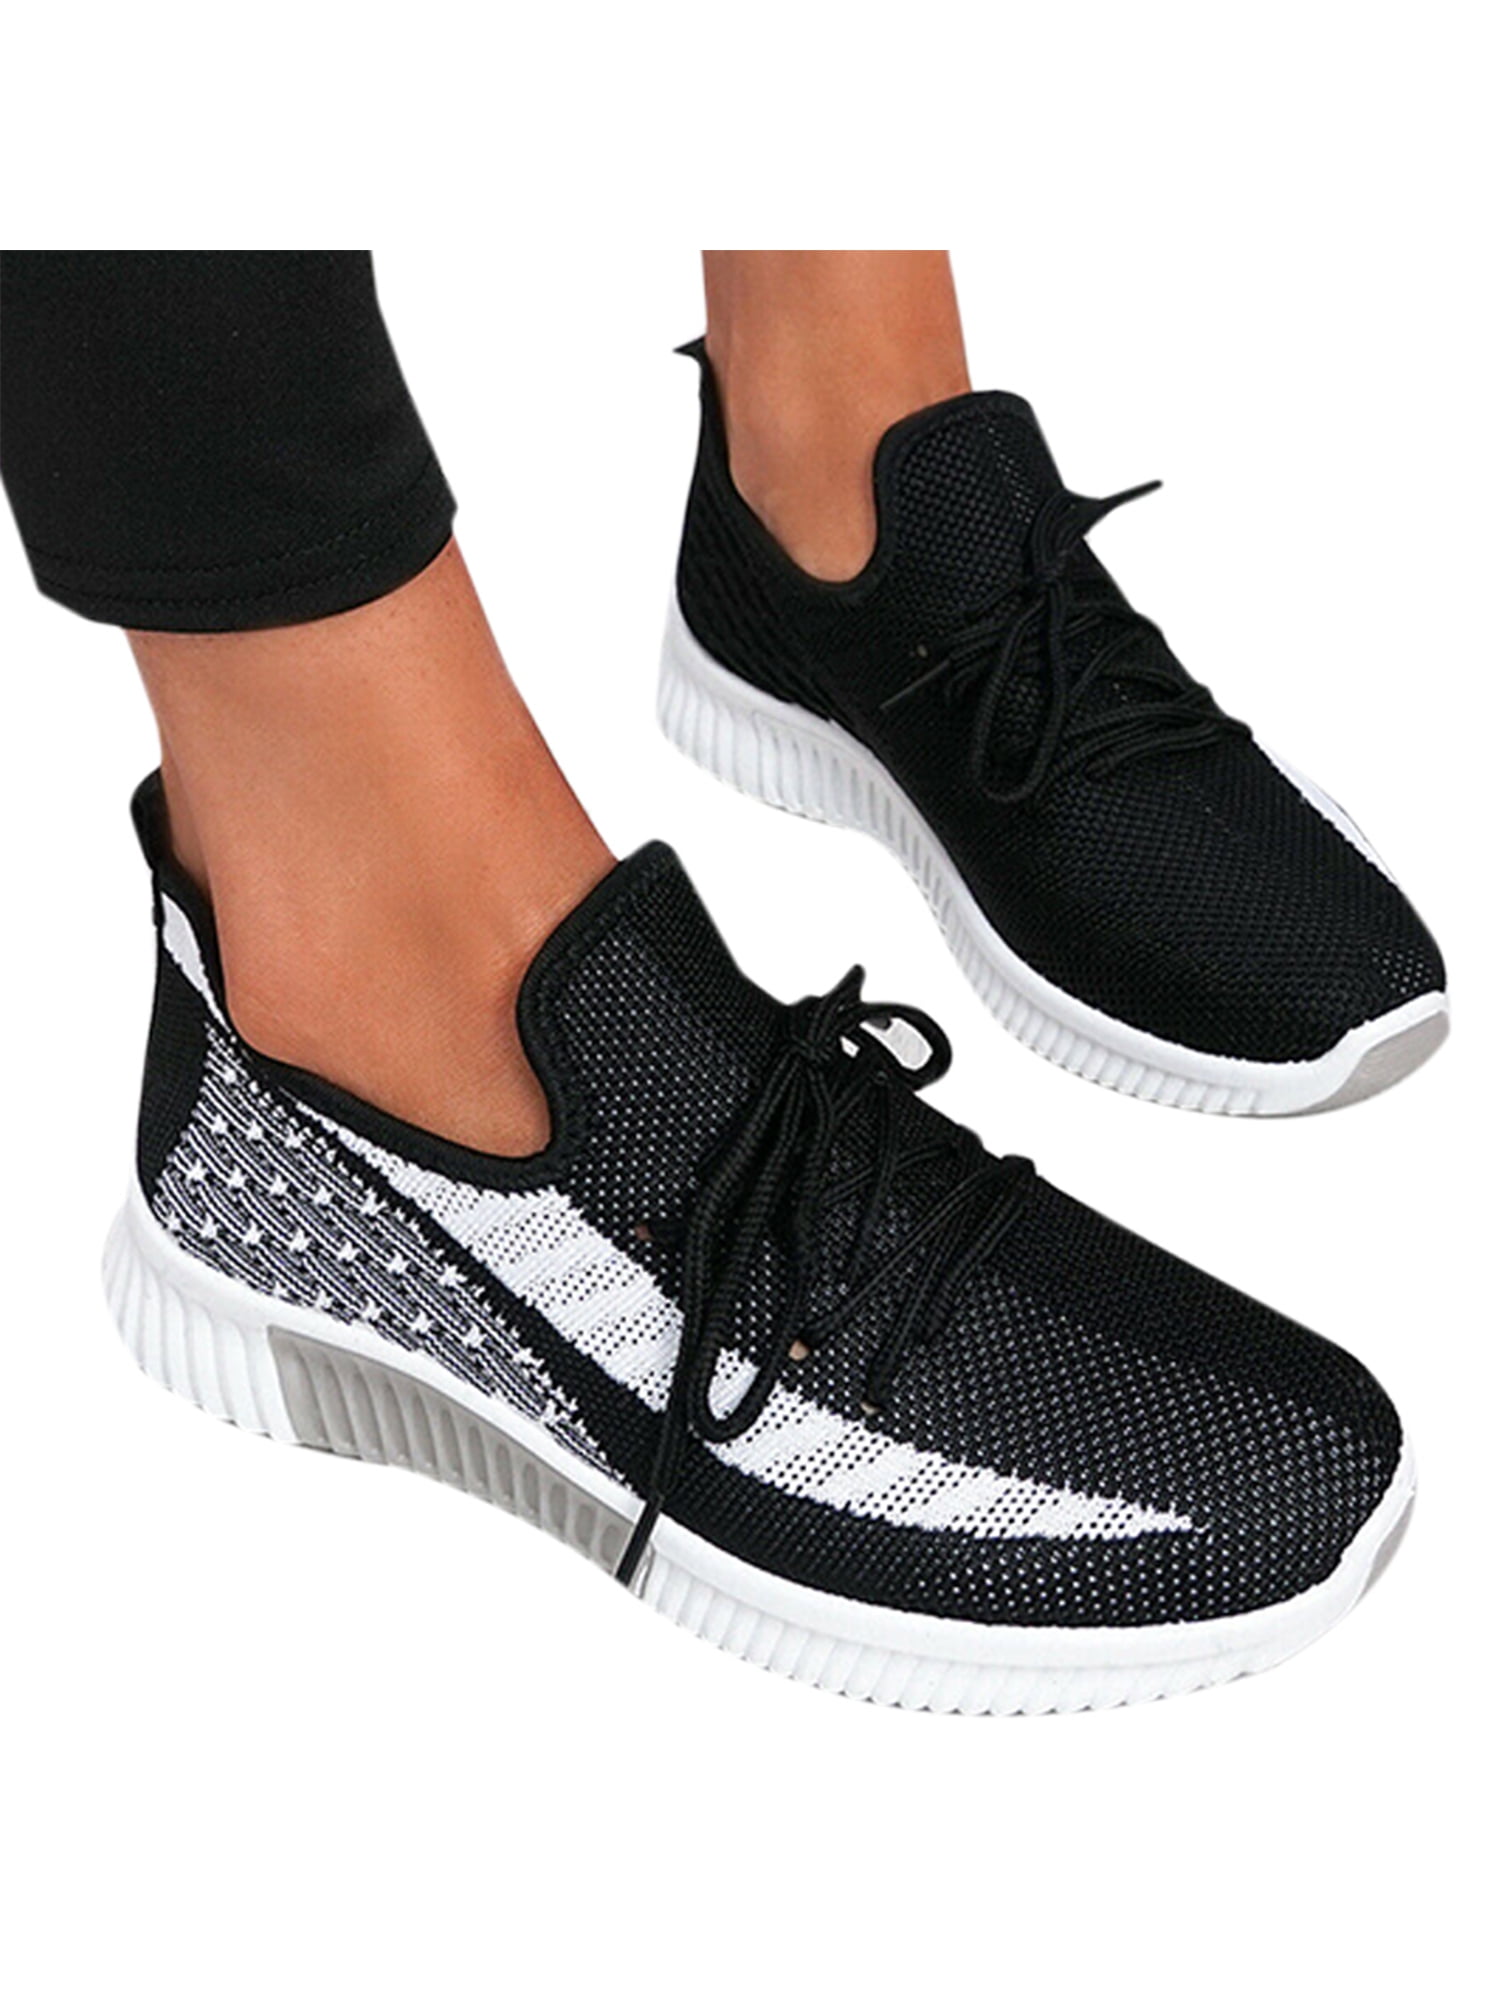 WOMENS LADIES TRAINERS LACE UP SPORT SNEAKERS CASUAL RUNNING FITNESS SHOES SIZE 